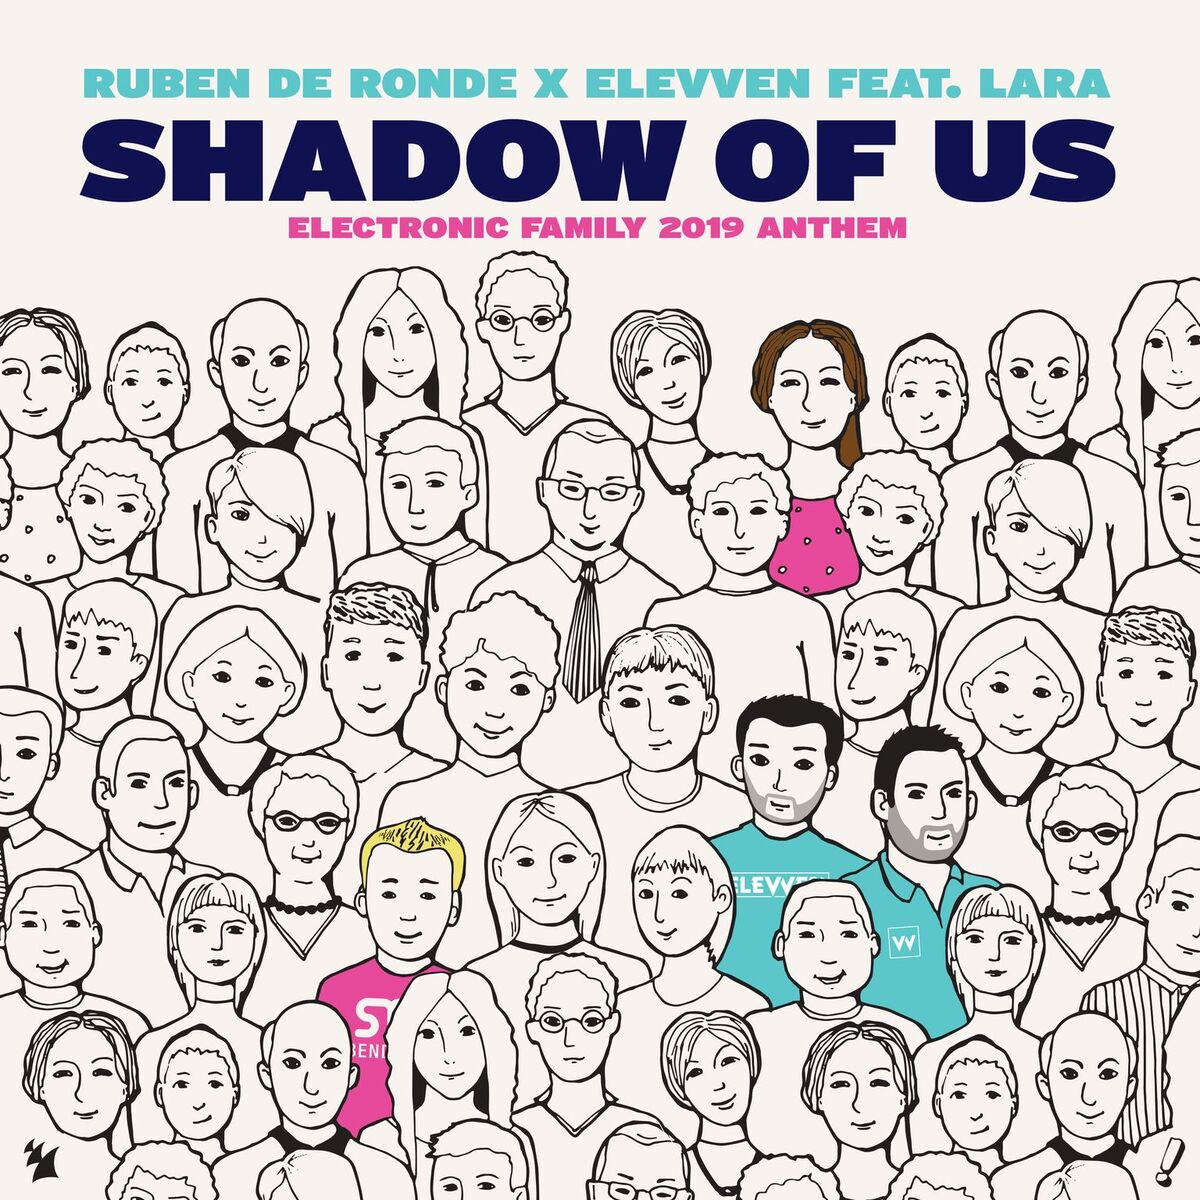 Ruben de Ronde x Elevven feat. Lara presents Shadow Of Us (Electronic Family 2019 Anthem) on Armada Music